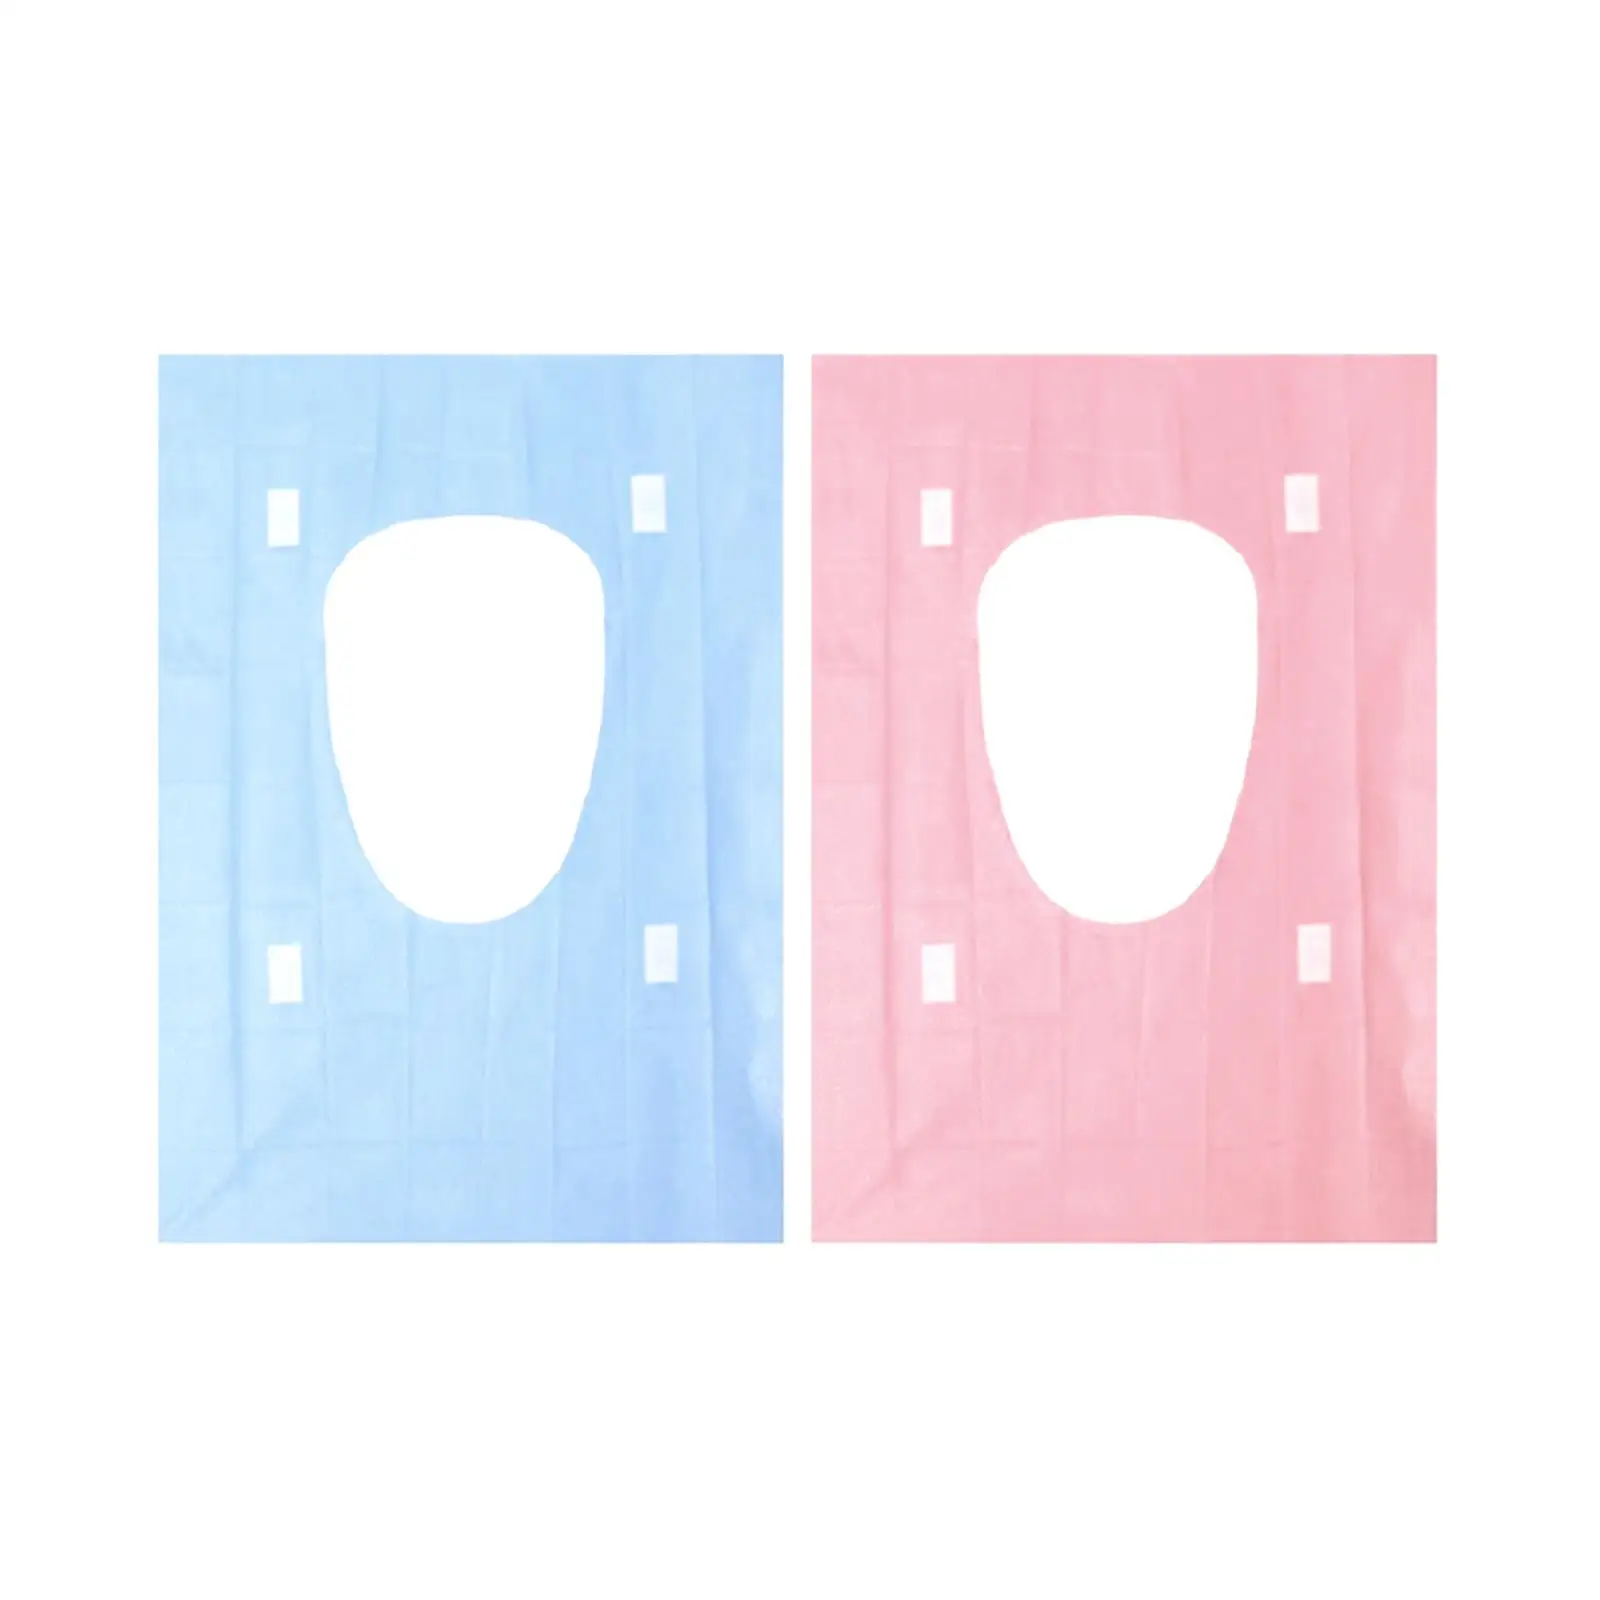 20 Pieces Toilet Seat Covers Disposable Nonslip Adhesives for Adults Kids Toddlers